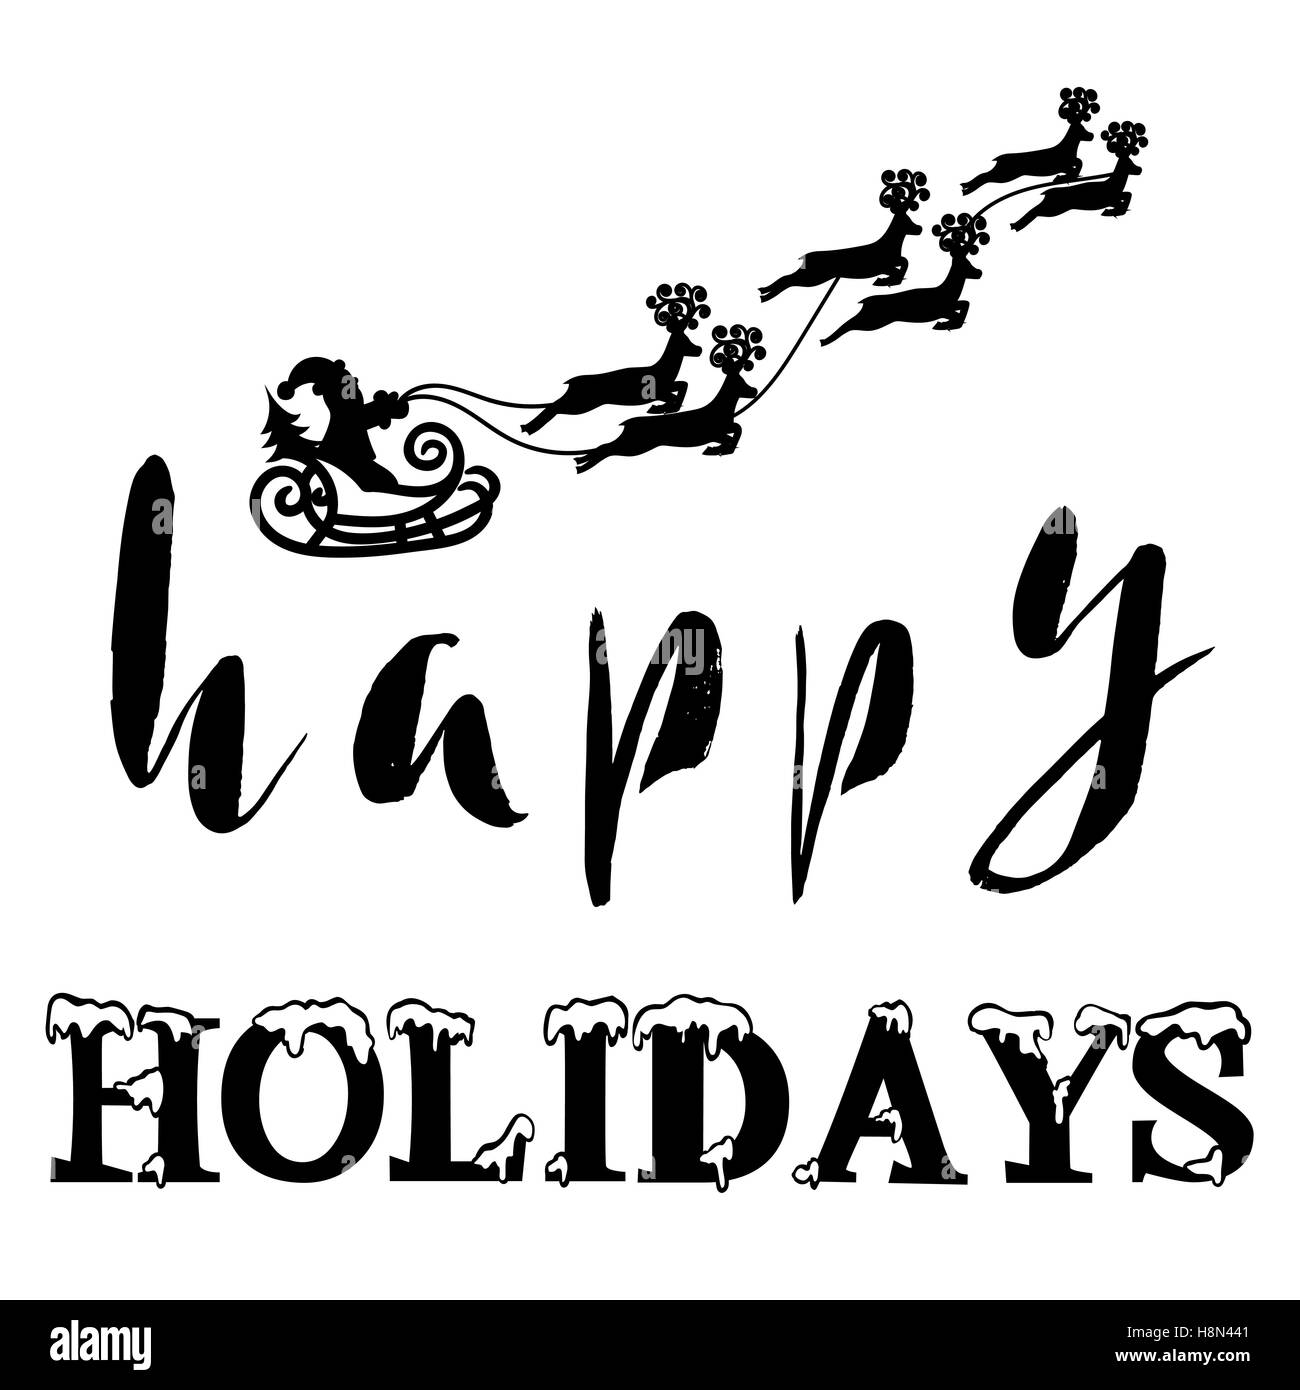 Silhouette Sleigh of Santa Claus and Reindeers. Happy Holidays Lettering. Vector illustration Stock Vector